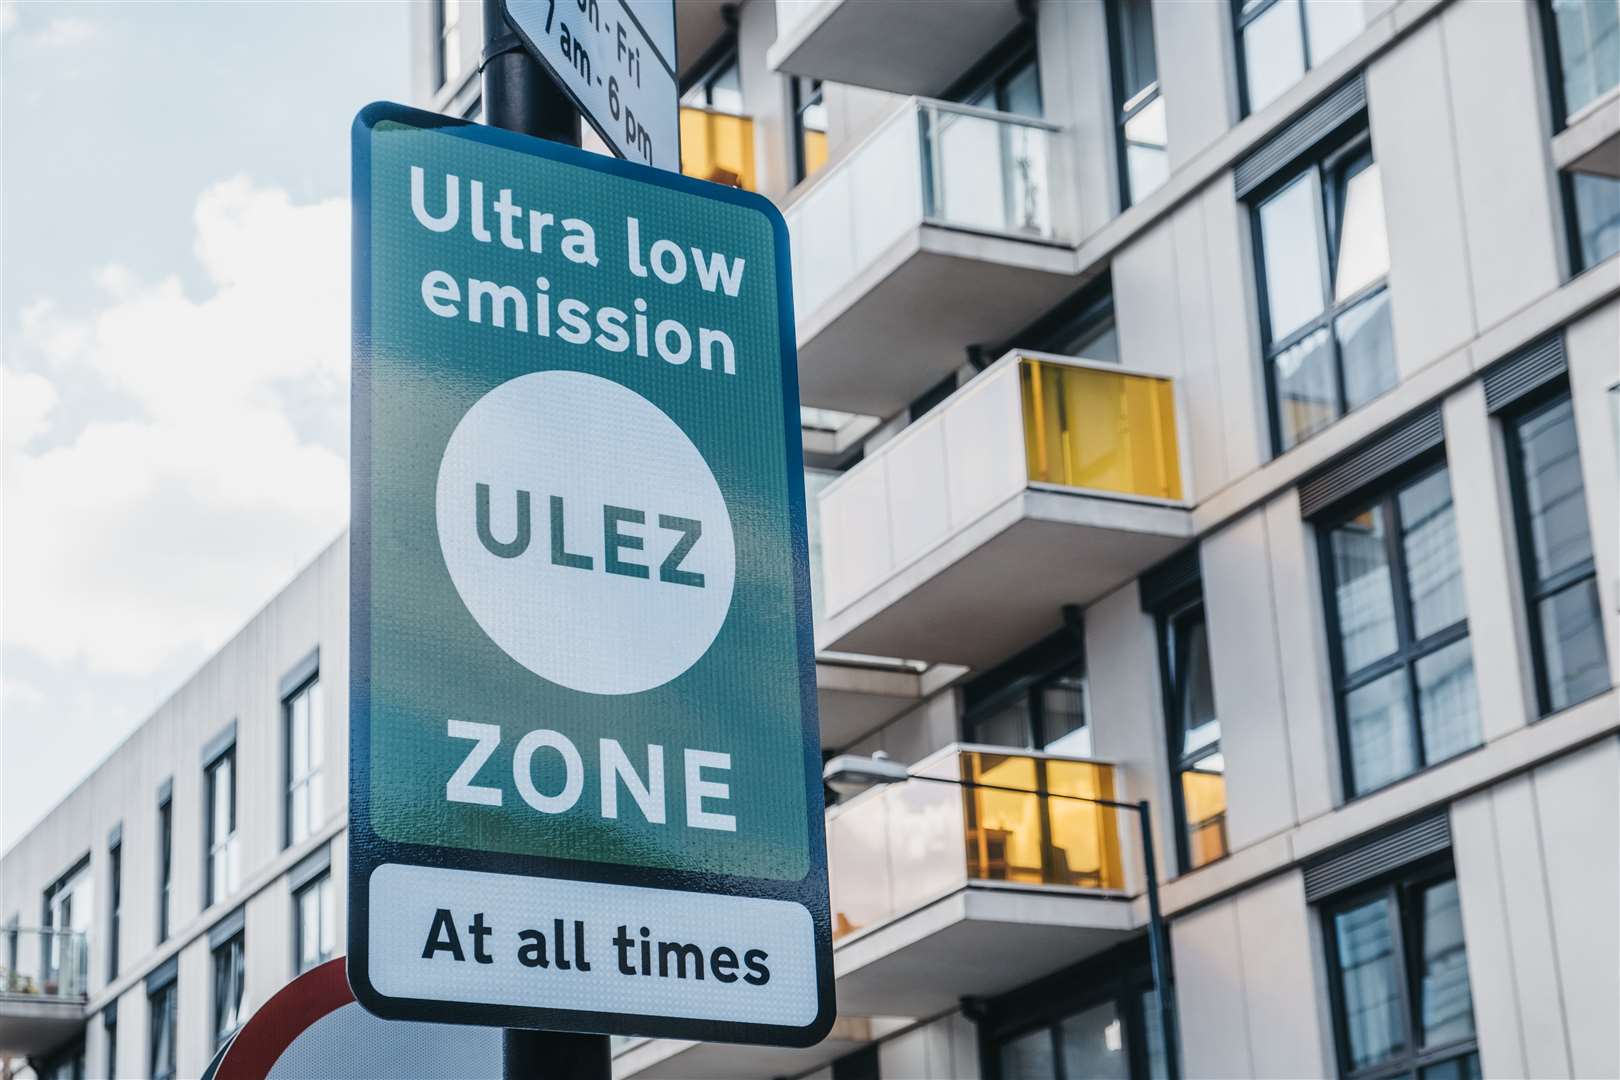 Three councils have blocked TfL from installing signs indicating the Ultra Low Emission Zone